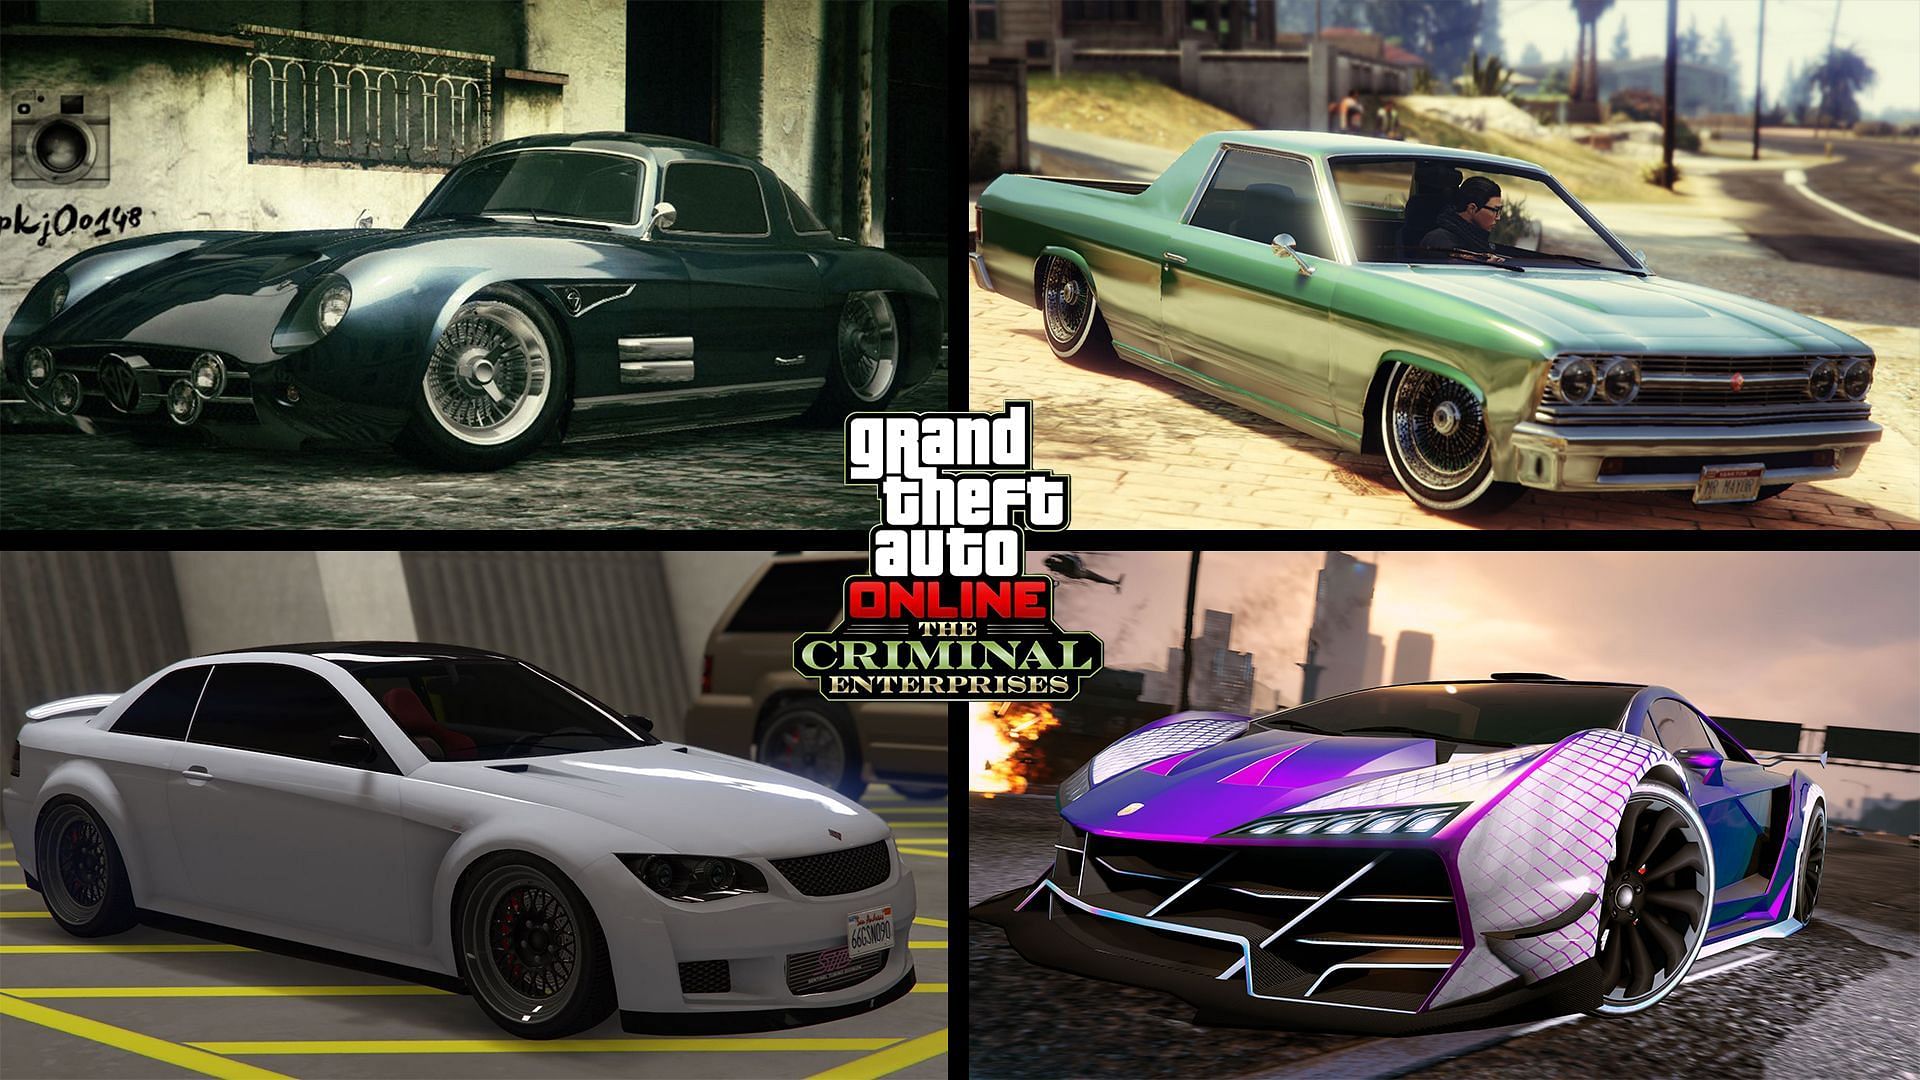 Gran Turismo 5 E3 Trailer recreated in GTA V and looks gorgeous  (Side-by-side comparison video)